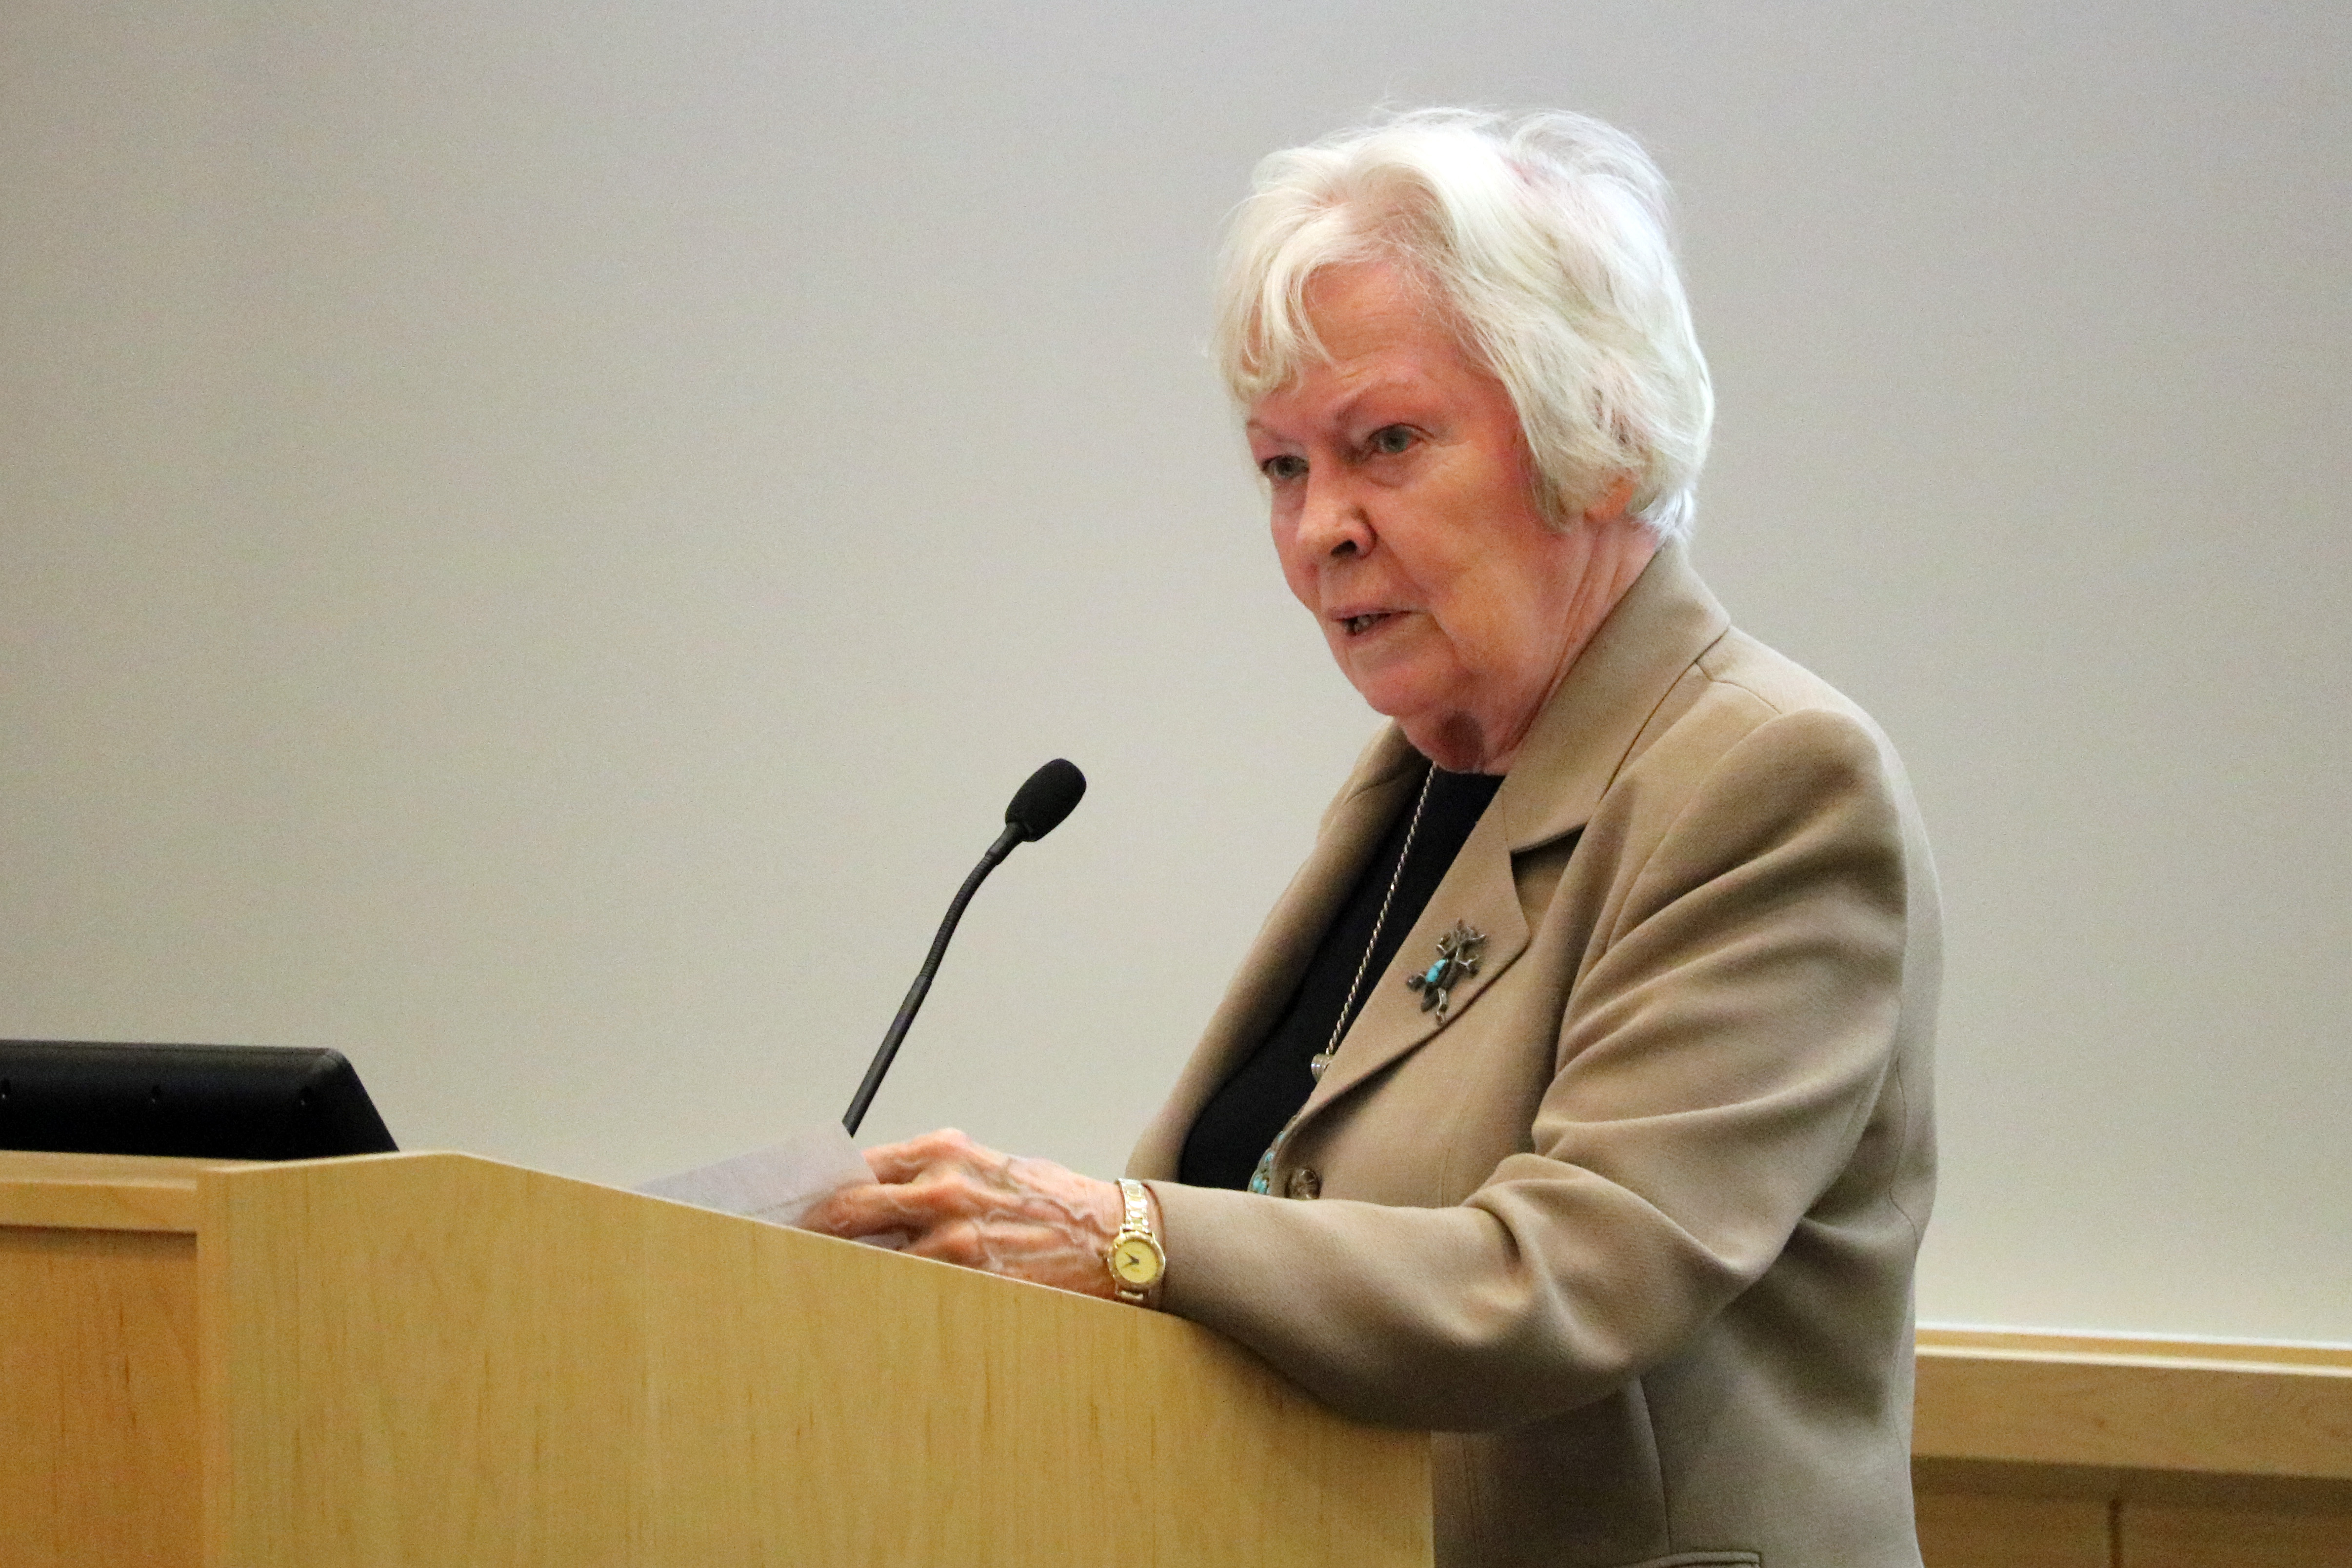 Dr. Nel Noddings, an award-winning feminist, educator and philosopher best known for her work regarding the “ethics of care,” spoke at USF Monday afternoon.